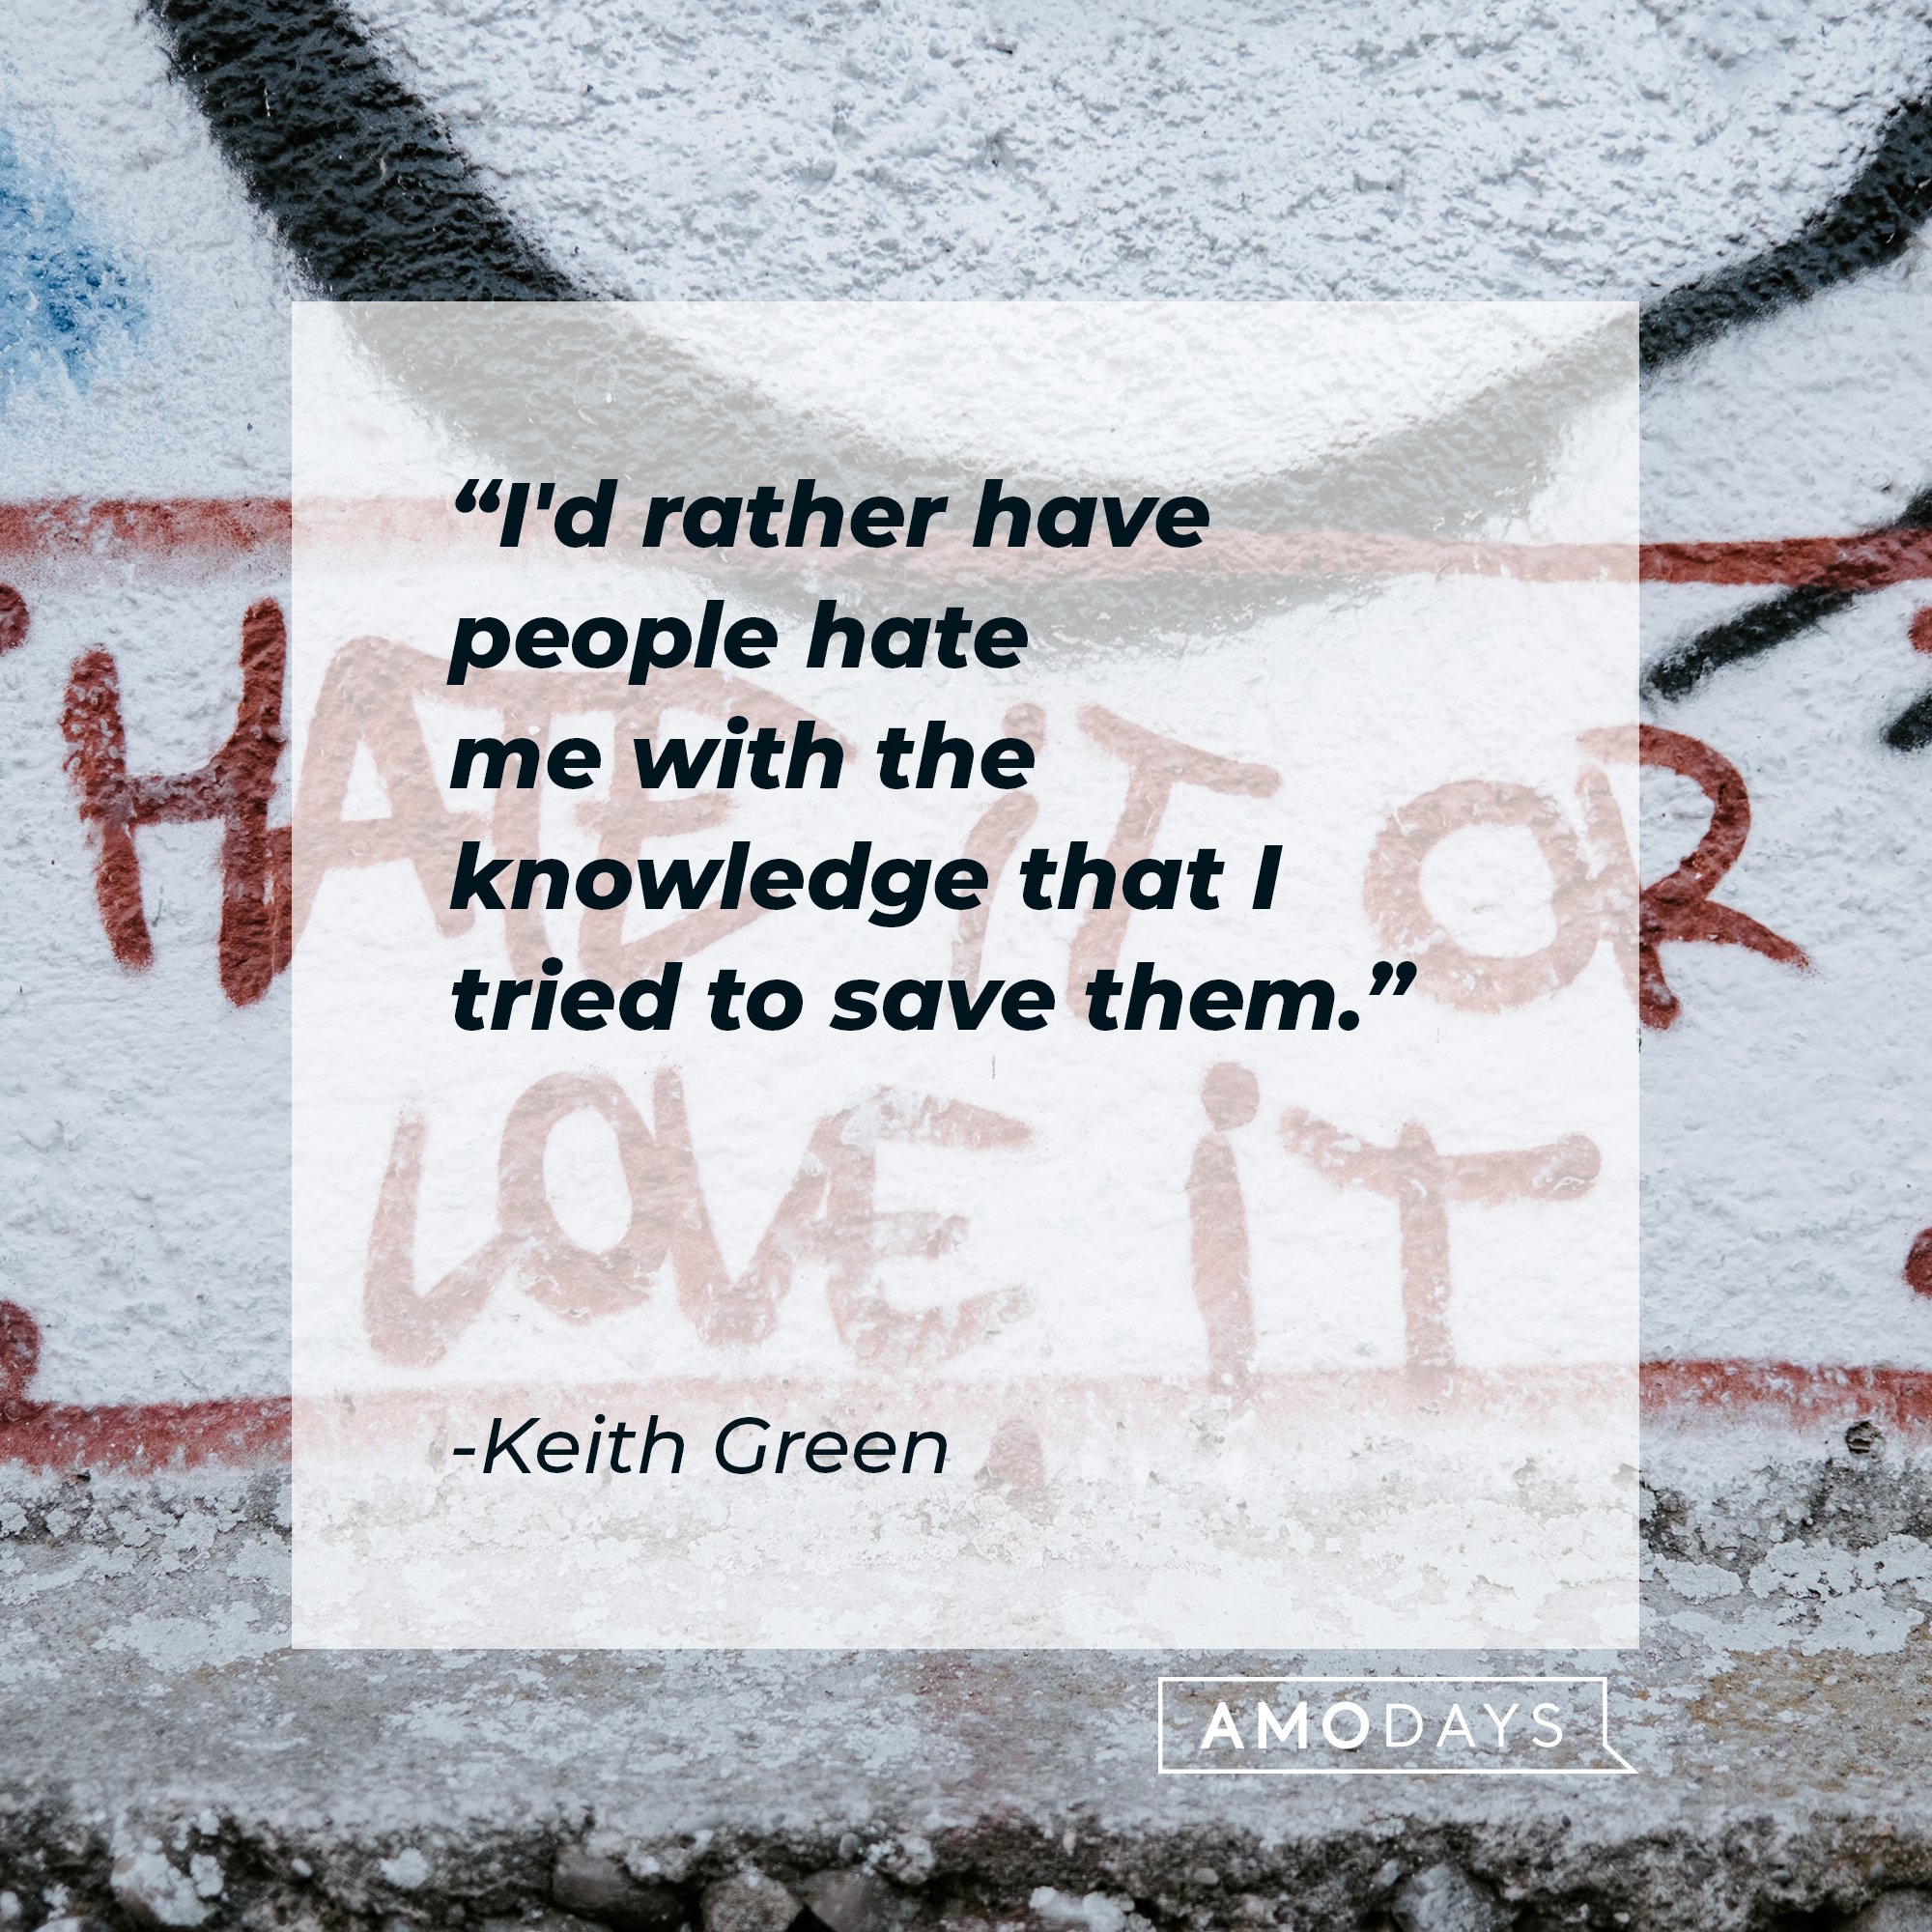 Keith Green’s quote: "I'd rather have people hate me with the knowledge that I tried to save them." | Image: AmoDays 